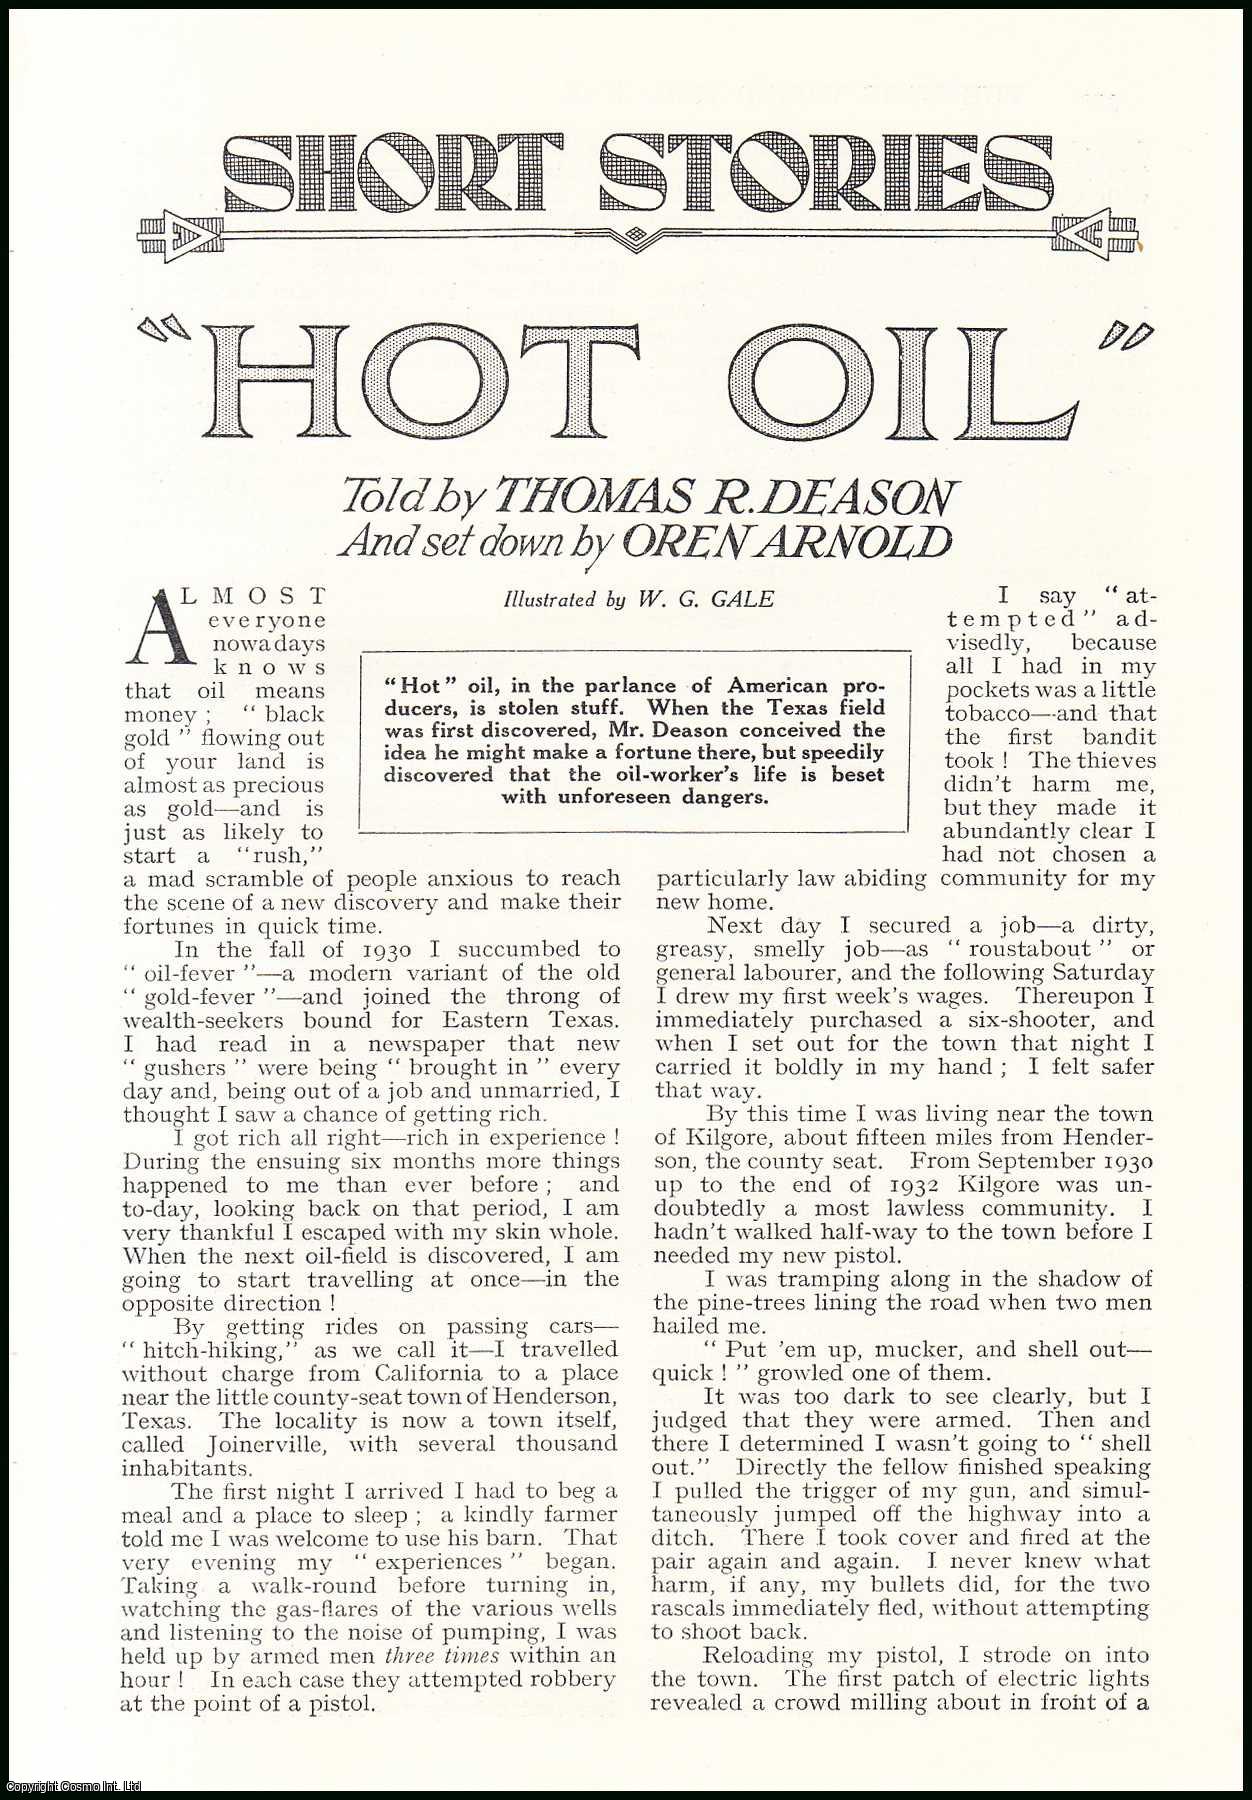 Thomas R. Deason & Oren Arnold. Illustrated by W.G. Gale. - Hot Oil : oil-worker's life, Texas Field. An uncommon original article from the Wide World Magazine, 1935.